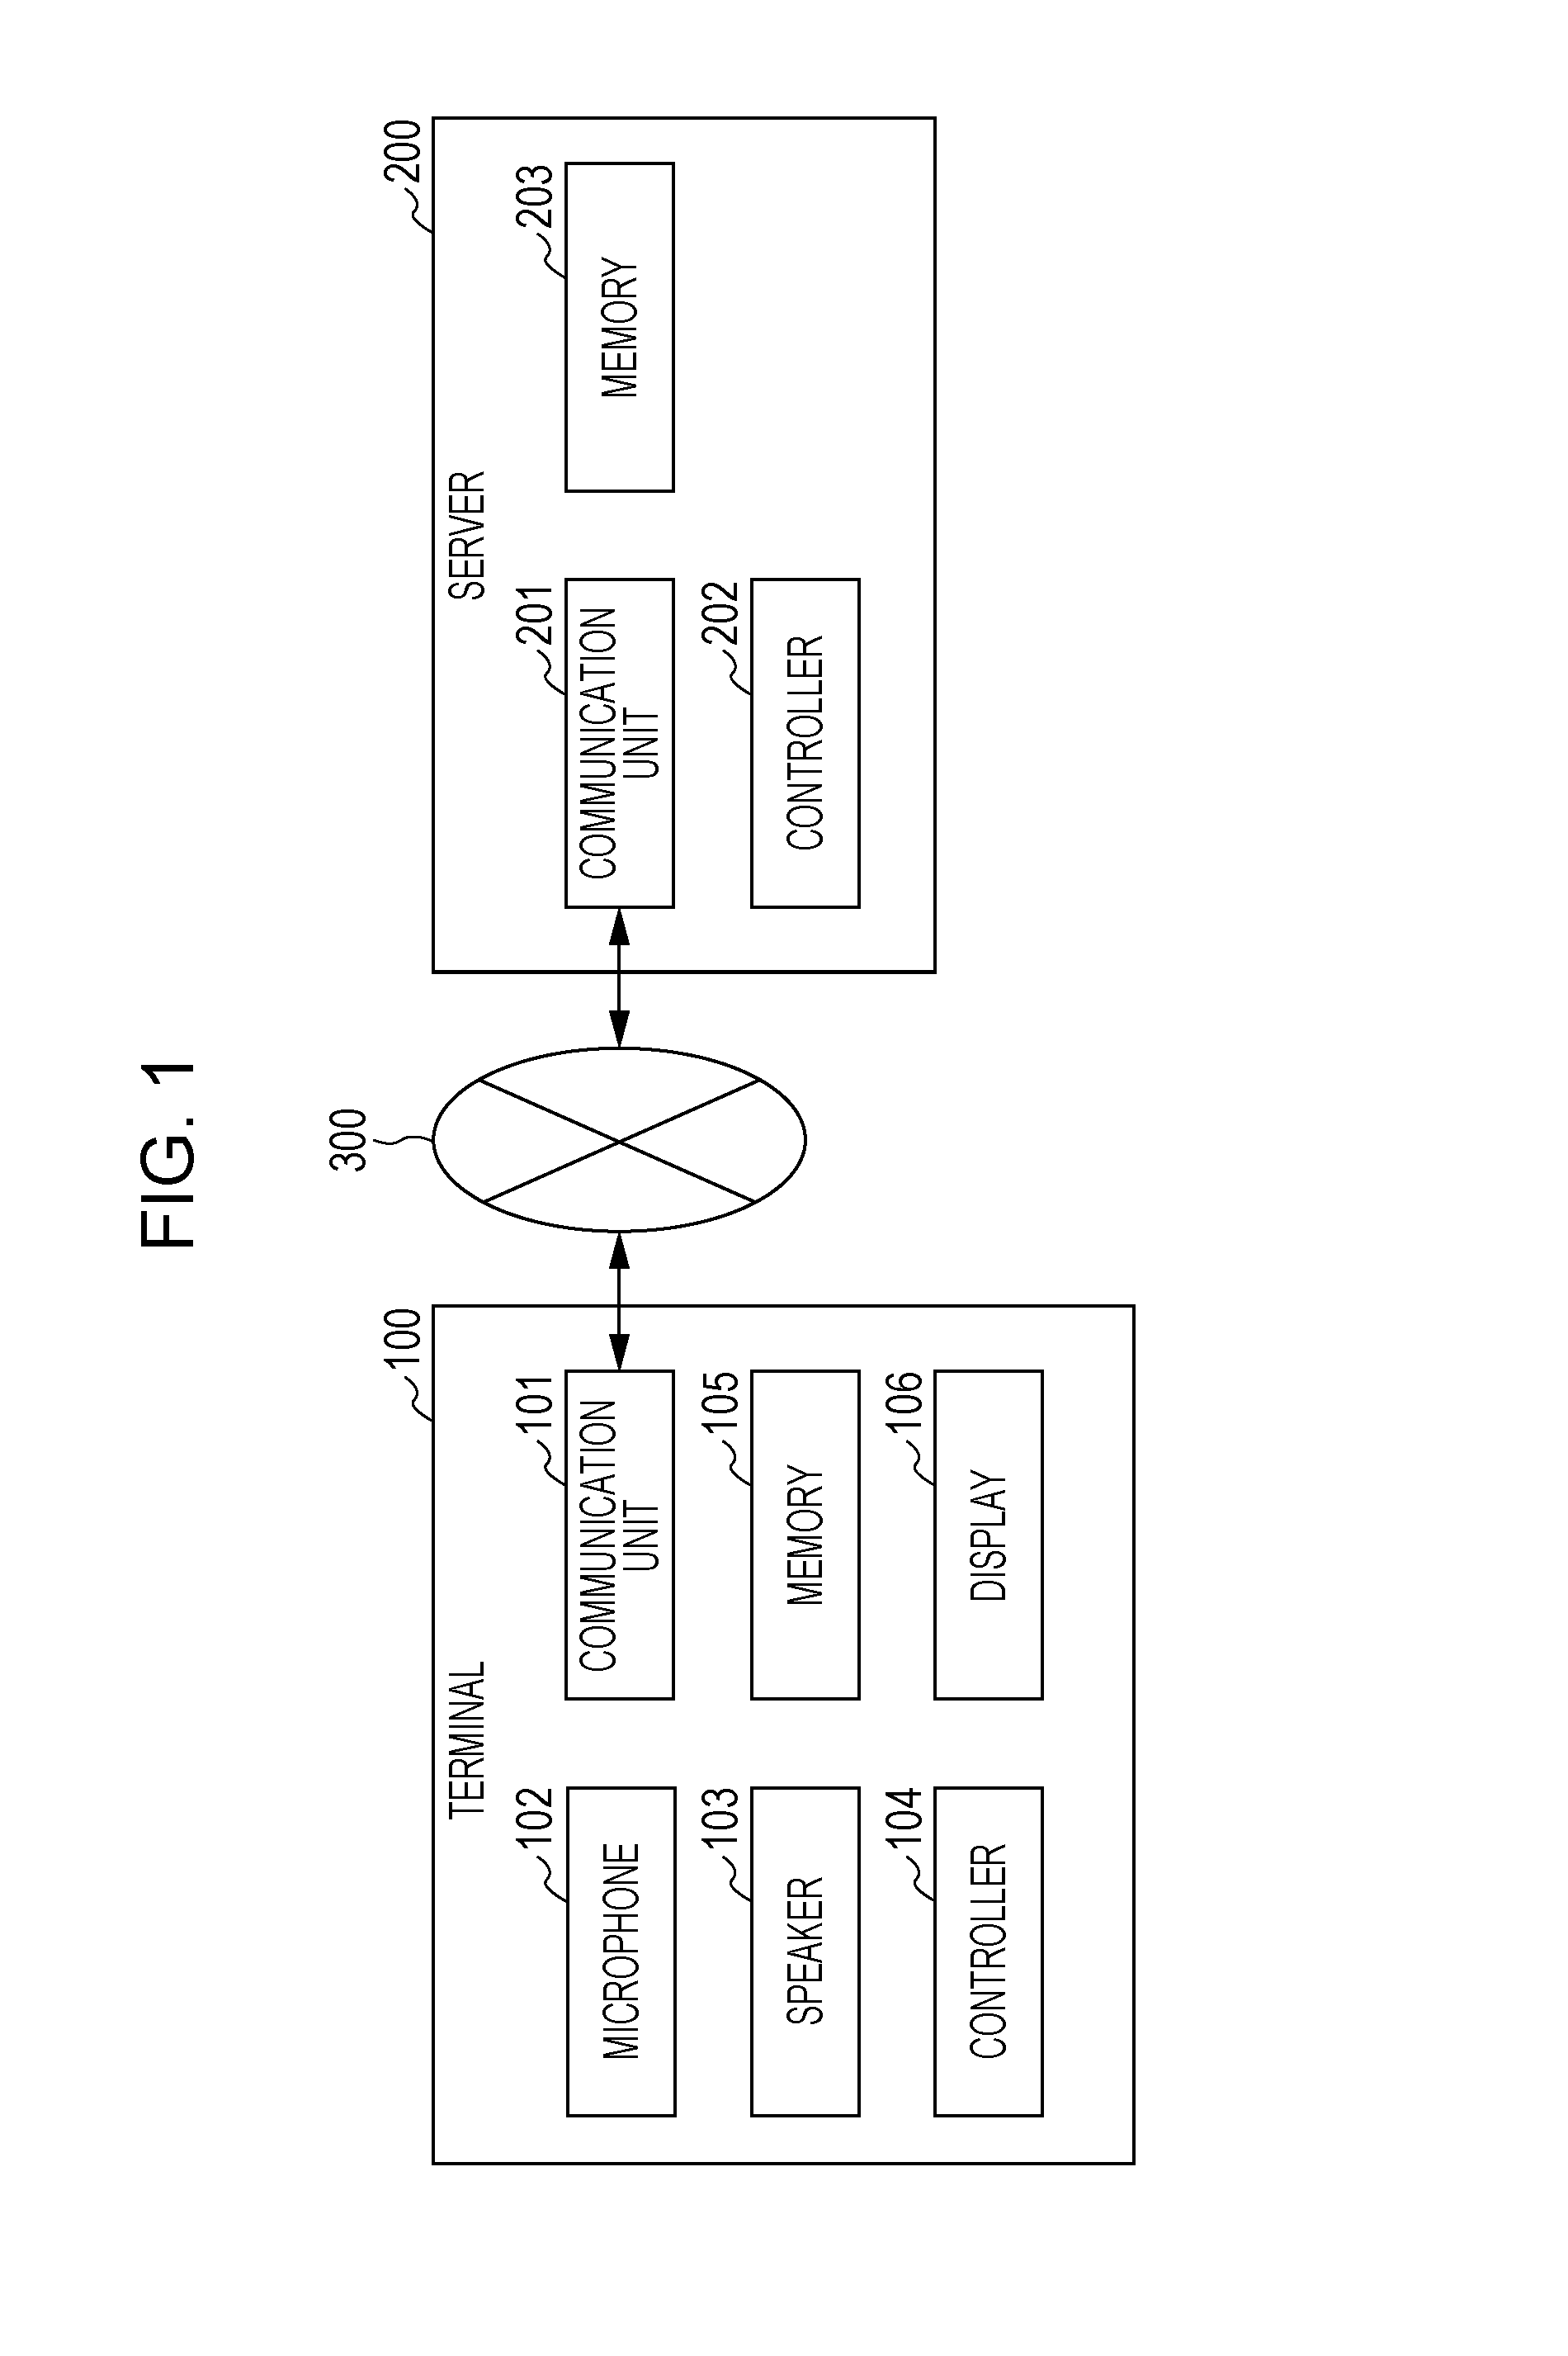 Speech recognition device and method